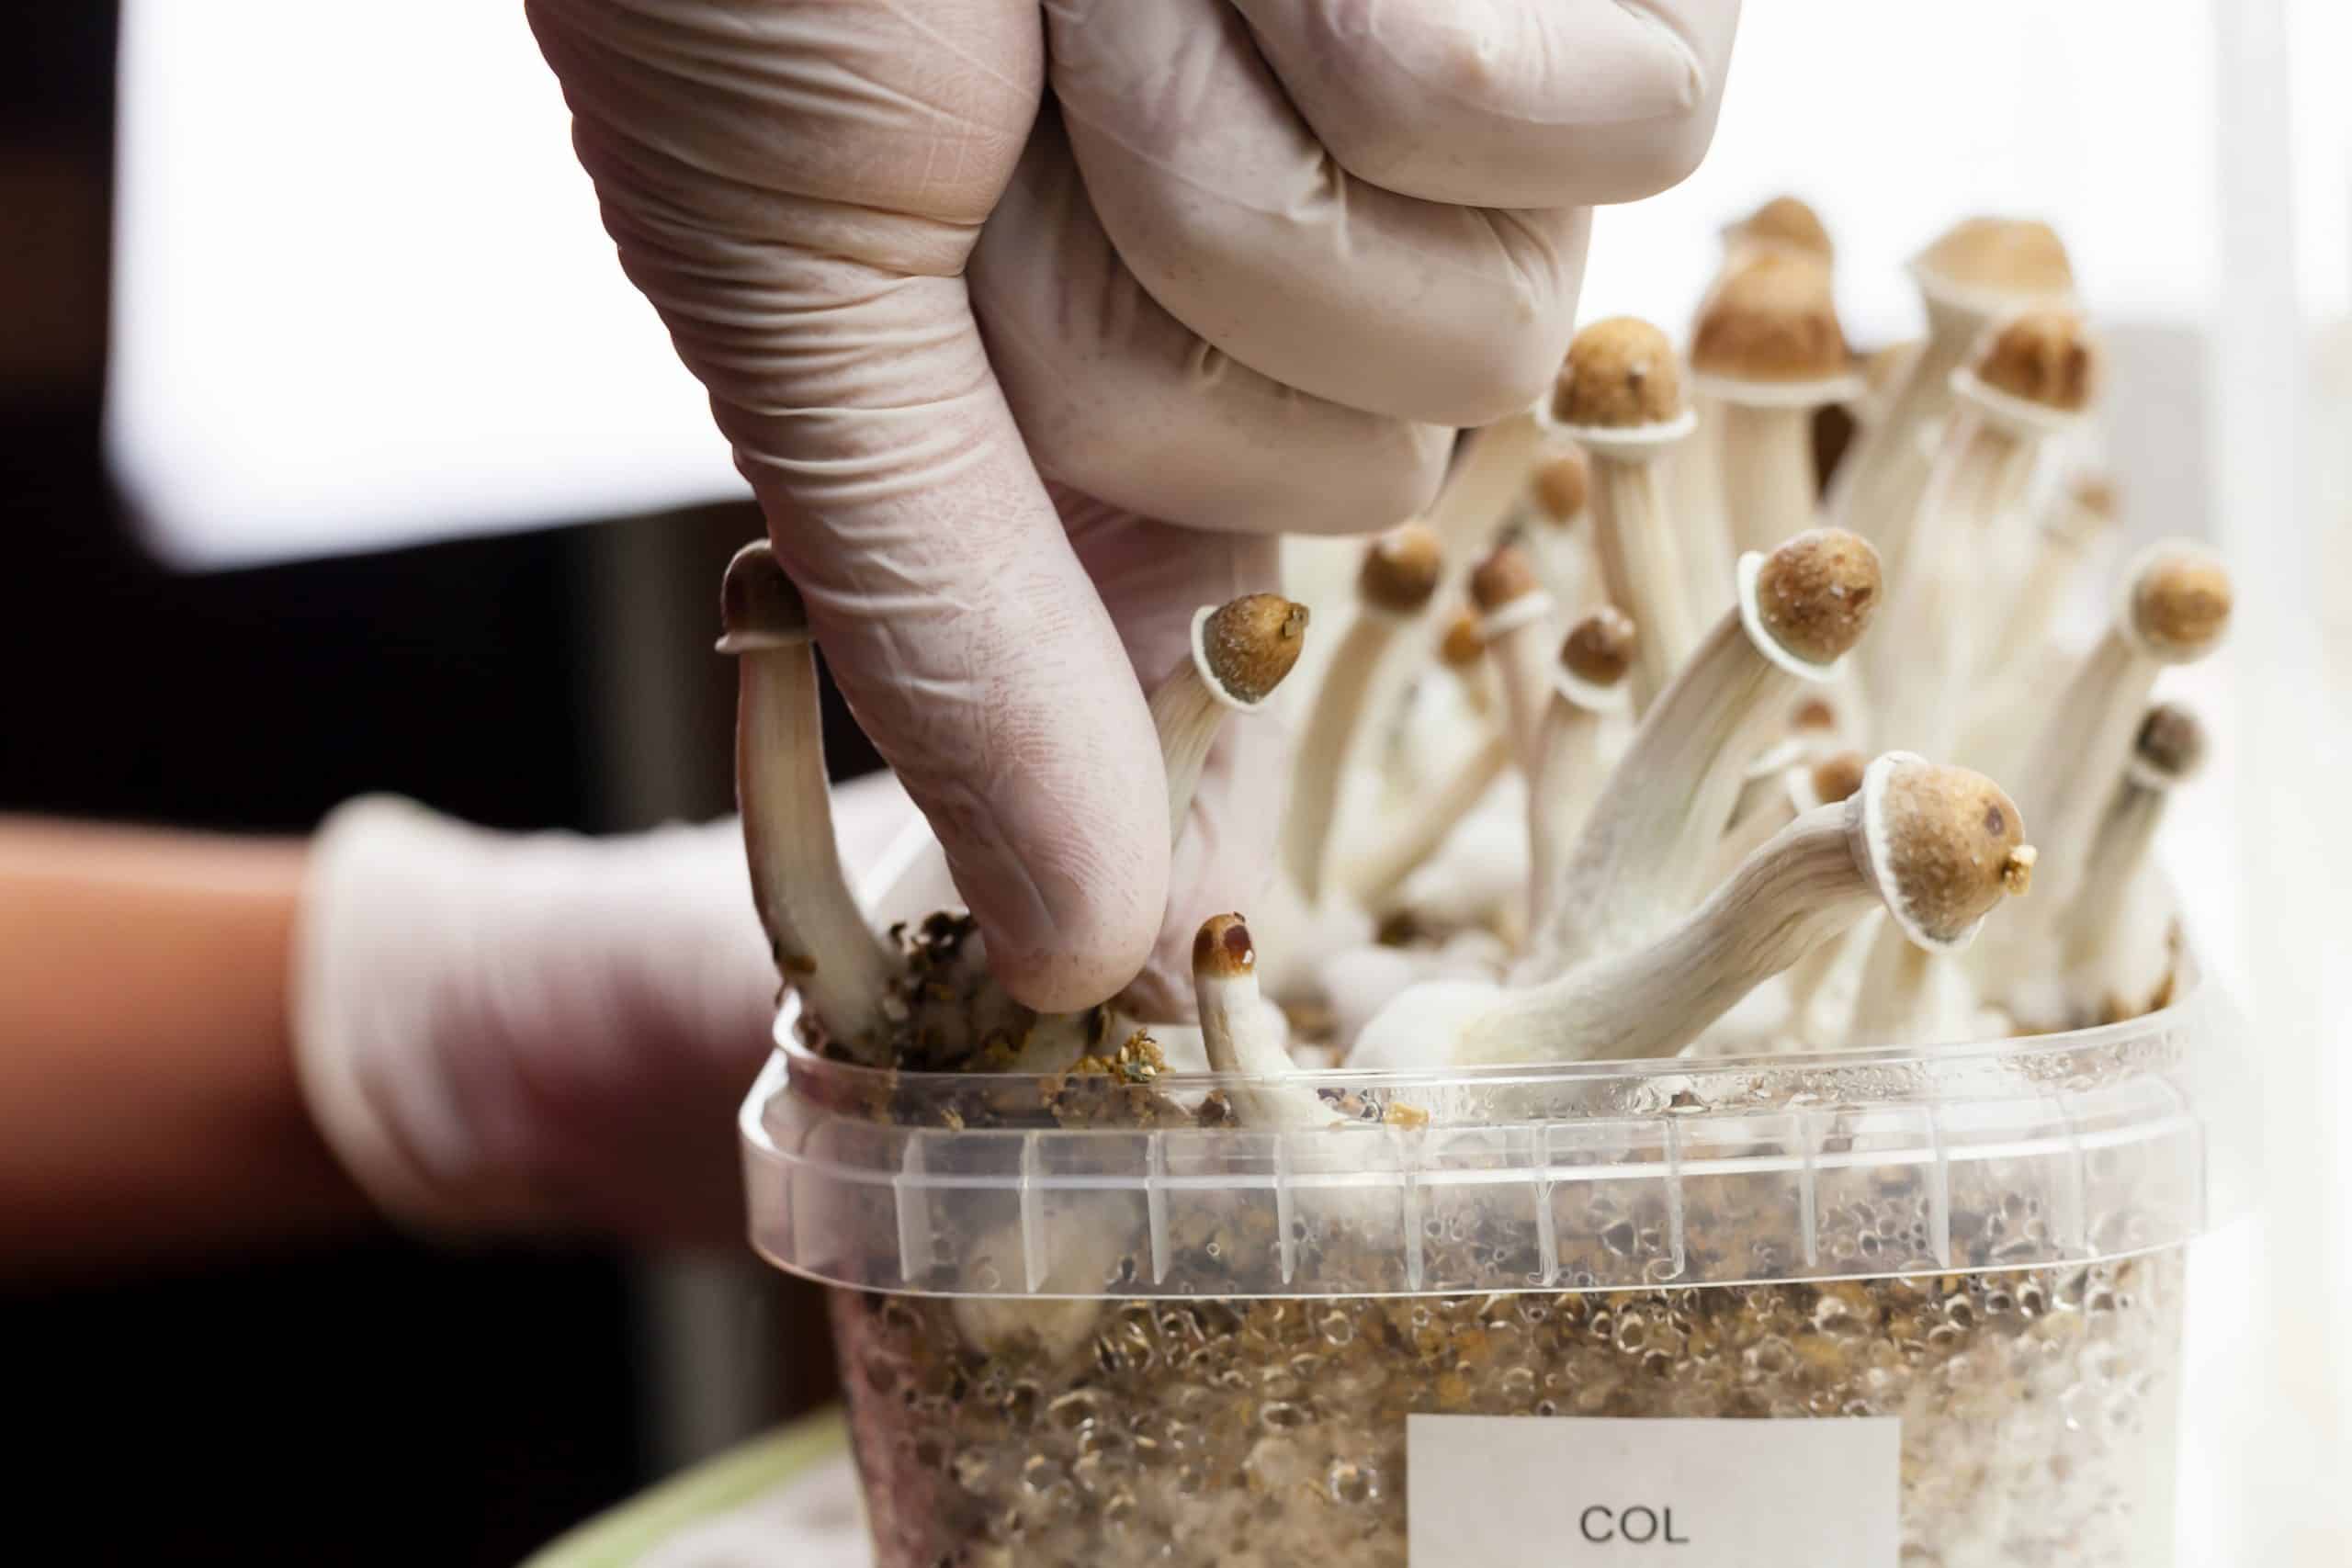 grow own mushrooms how to eat shrooms